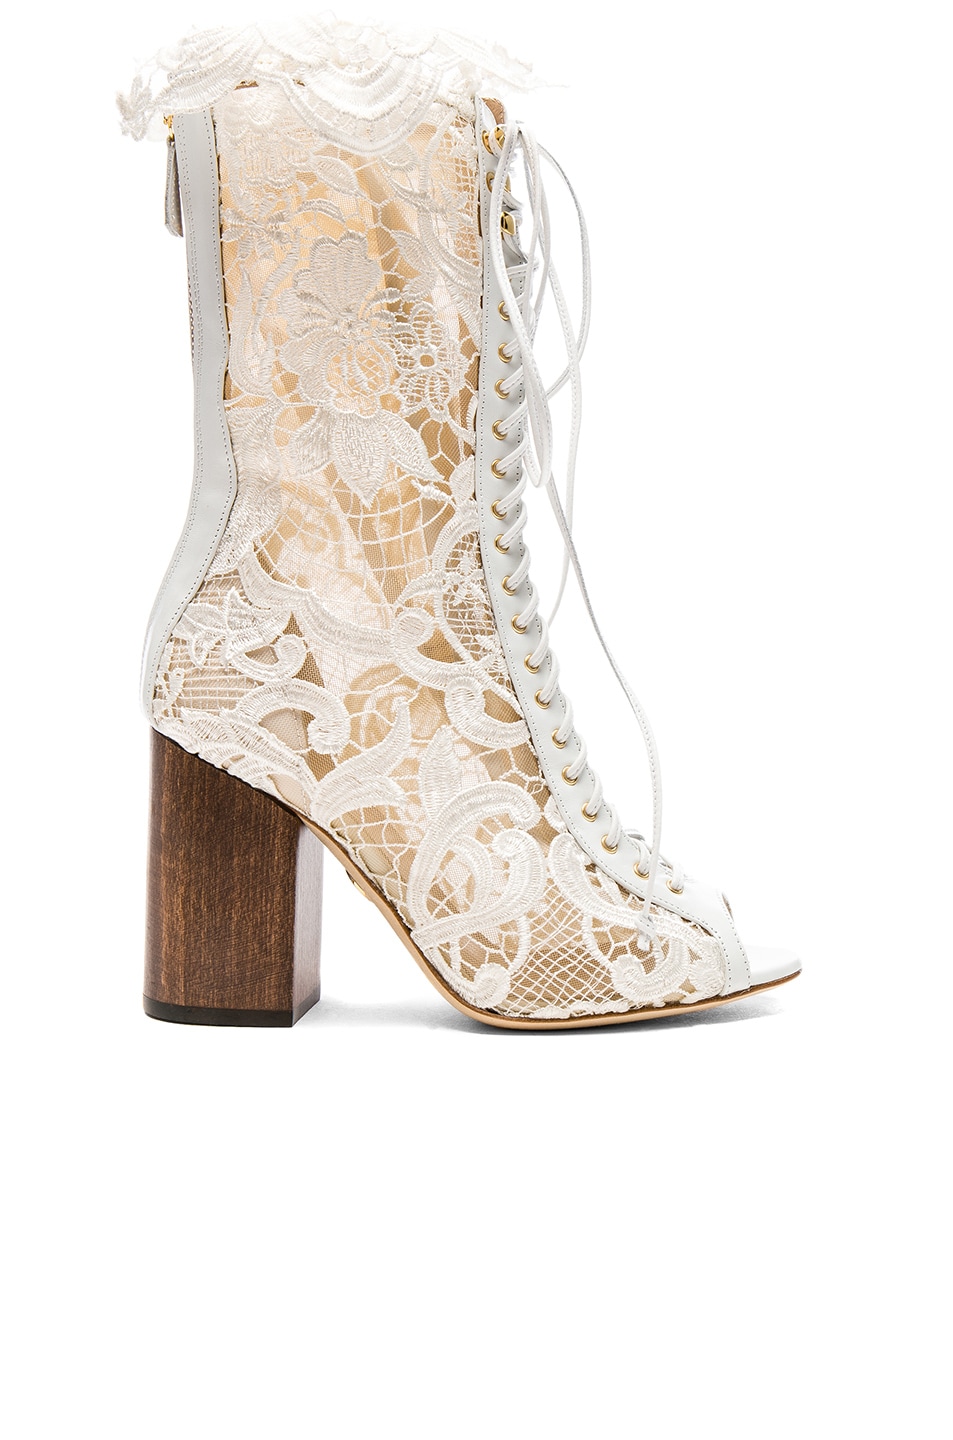 Image 1 of Brother Vellies for FWRD Exclusive Lace Open Toe Lali Boots in White Lace